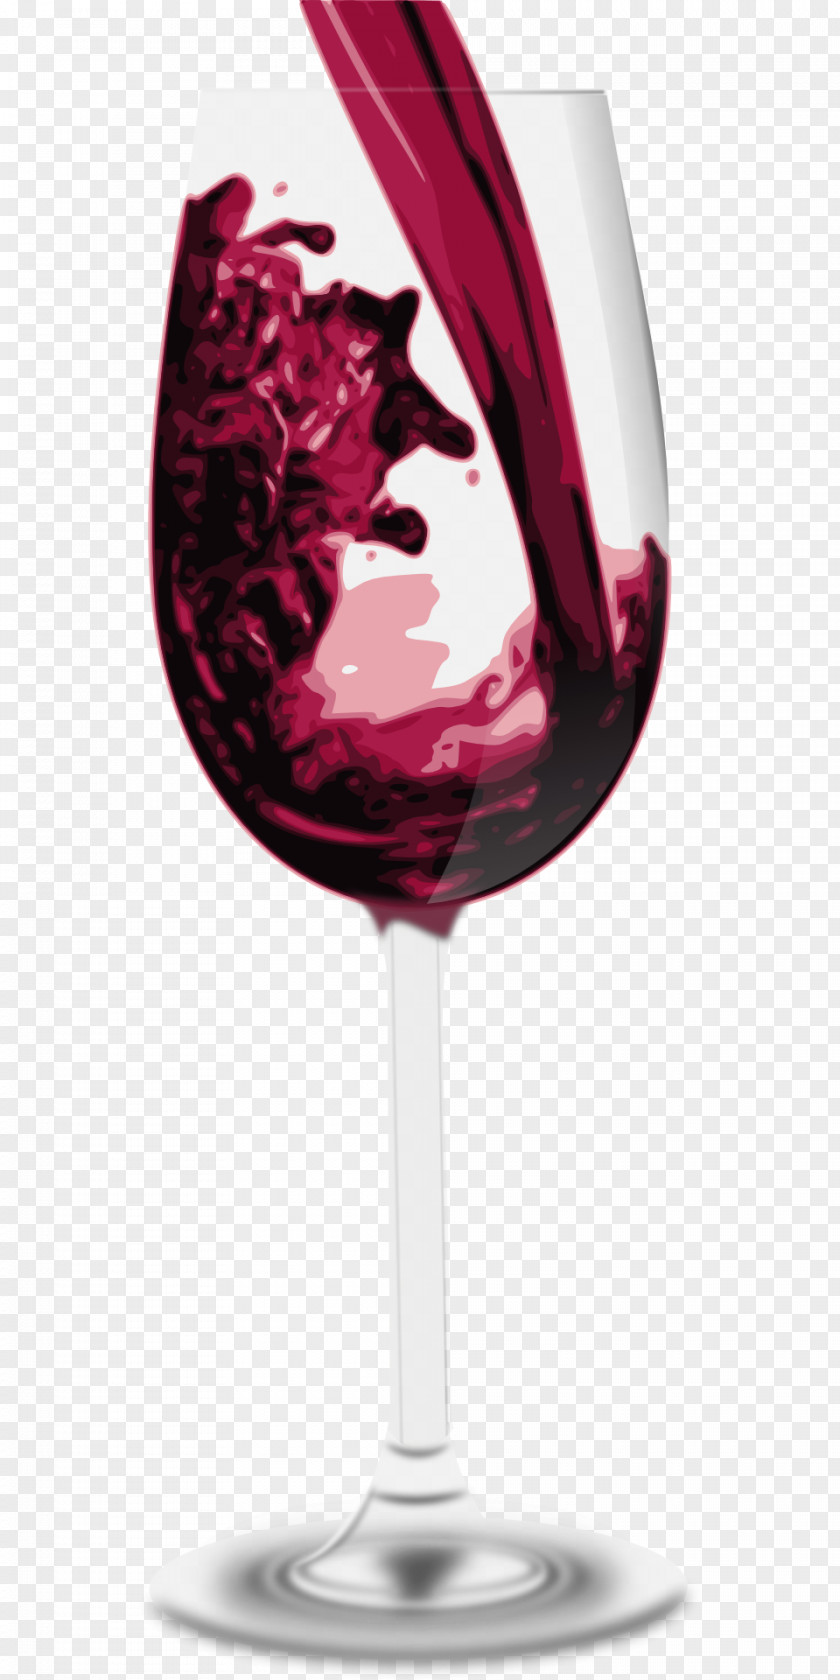 Wine Red White Champagne Cocktail PNG